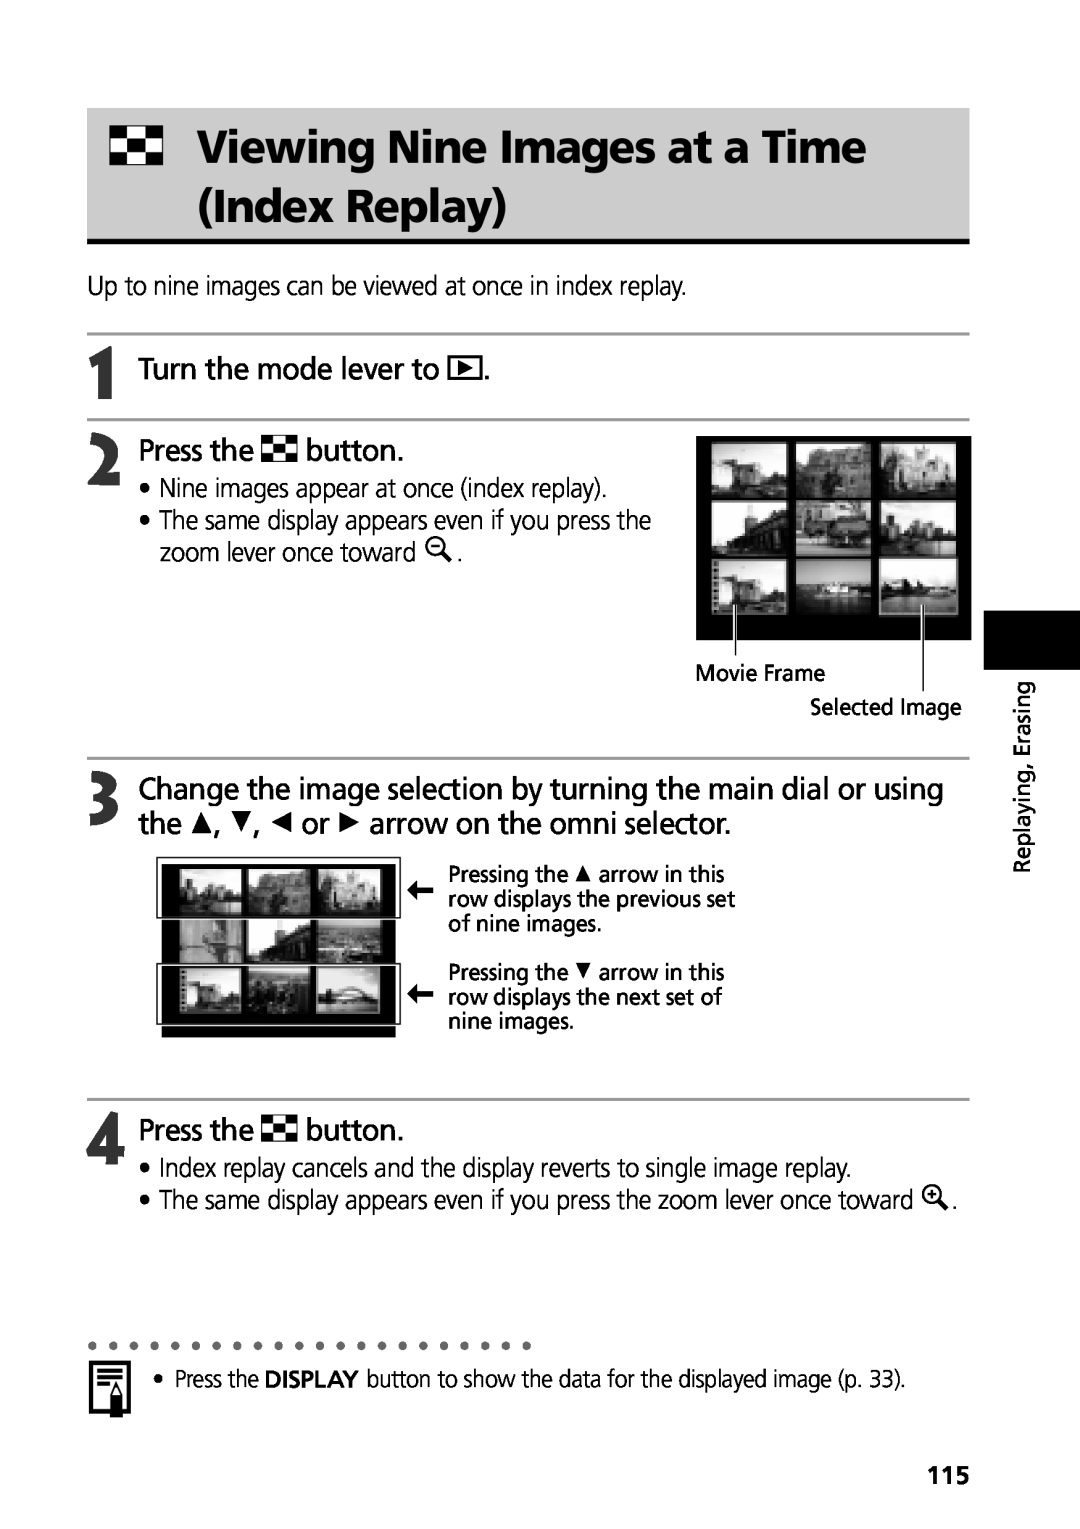 Canon G3 Viewing Nine Images at a Time Index Replay, Press the, Turn the mode lever to, button, Movie Frame Selected Image 